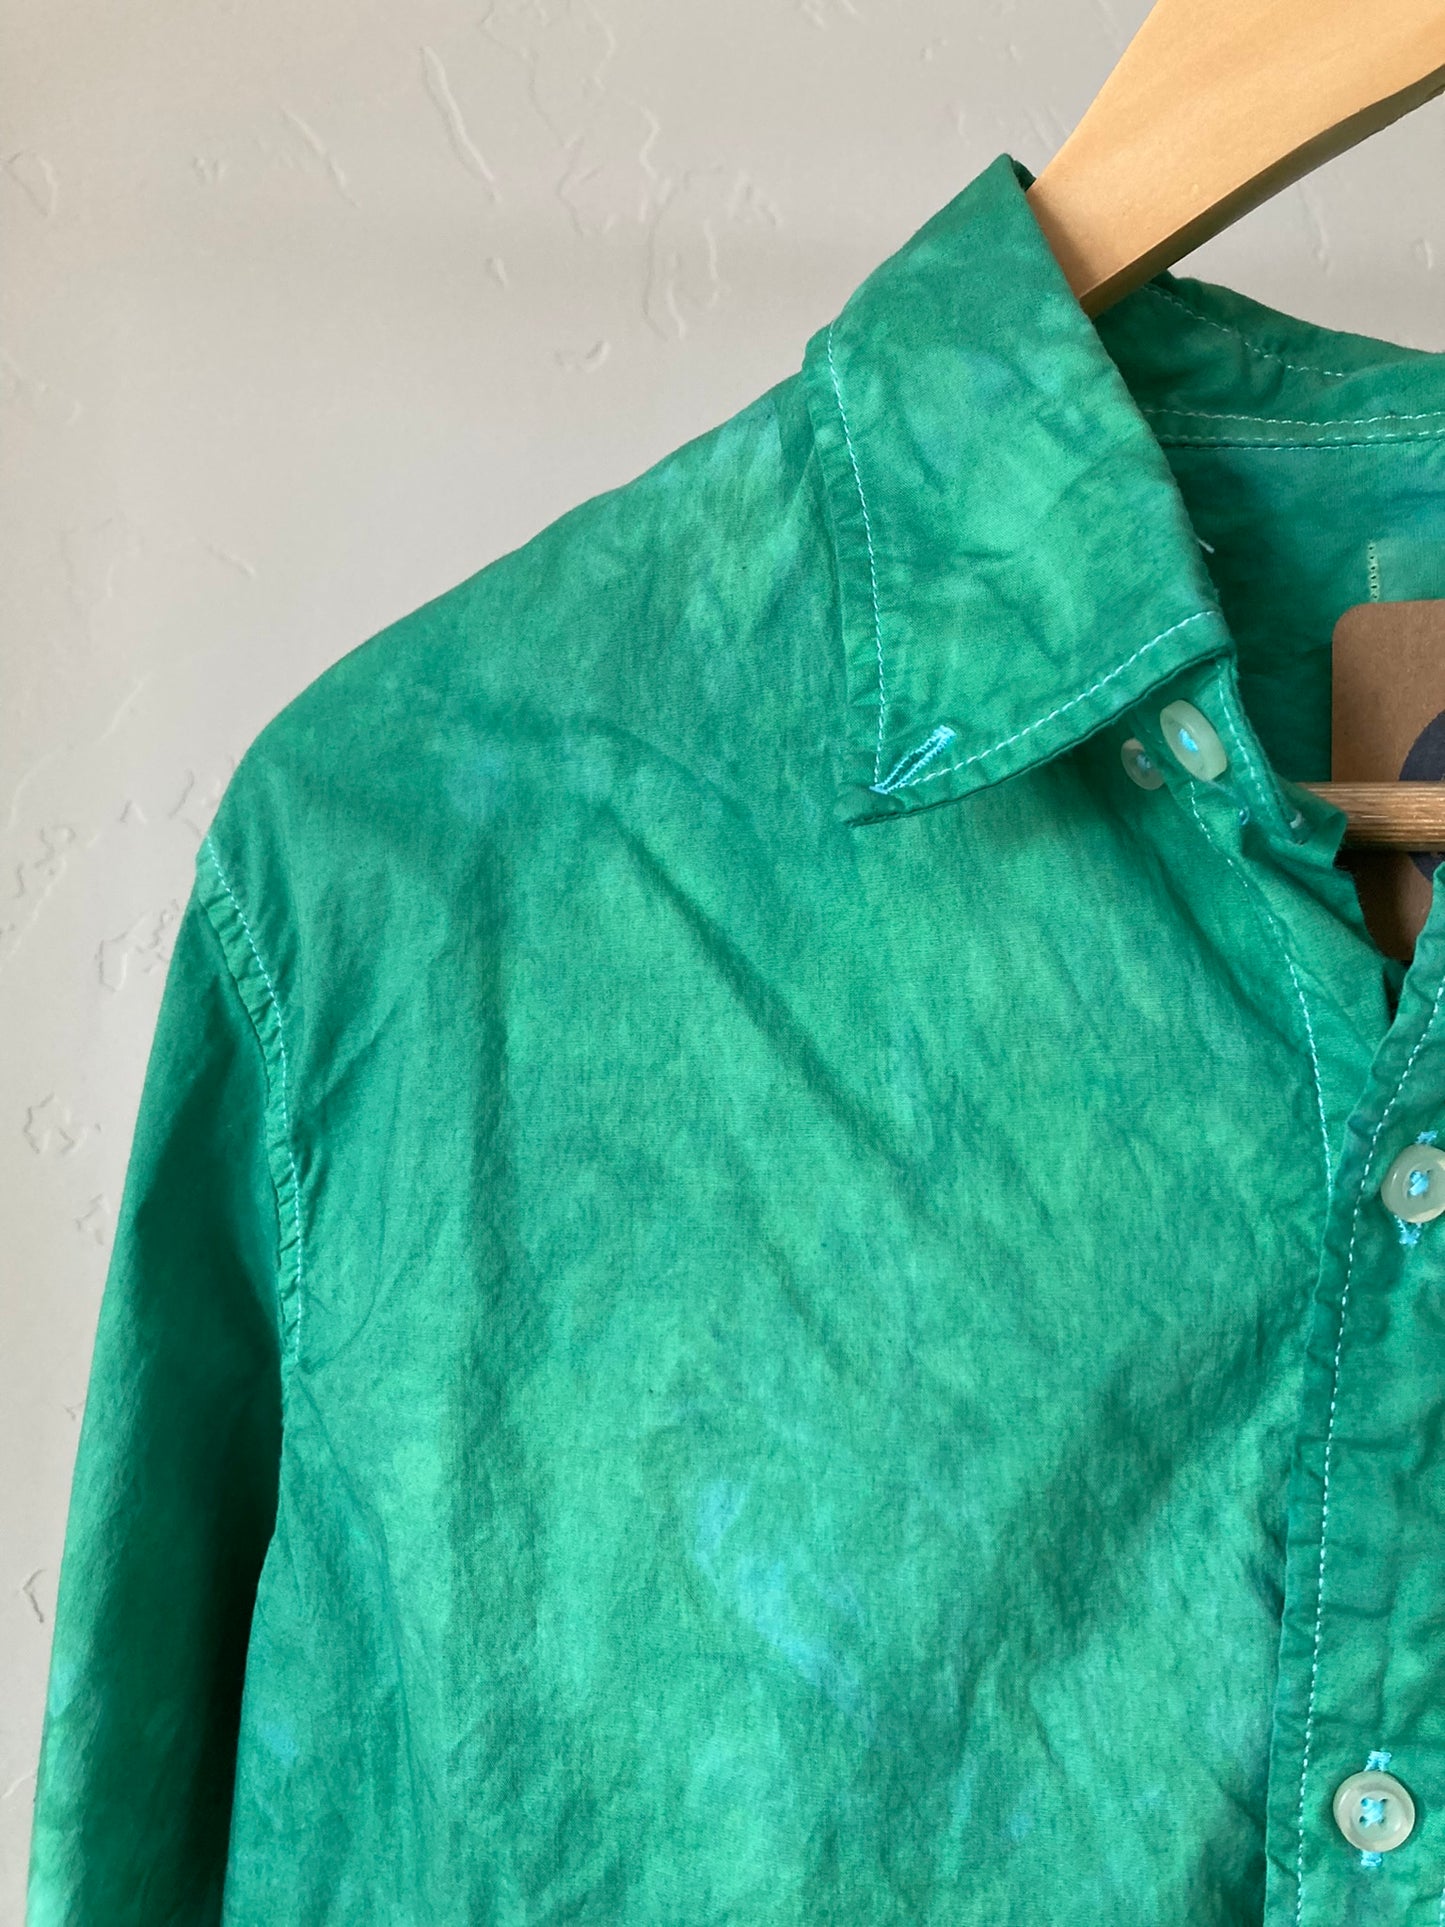 Kelly Green Button-Up- L